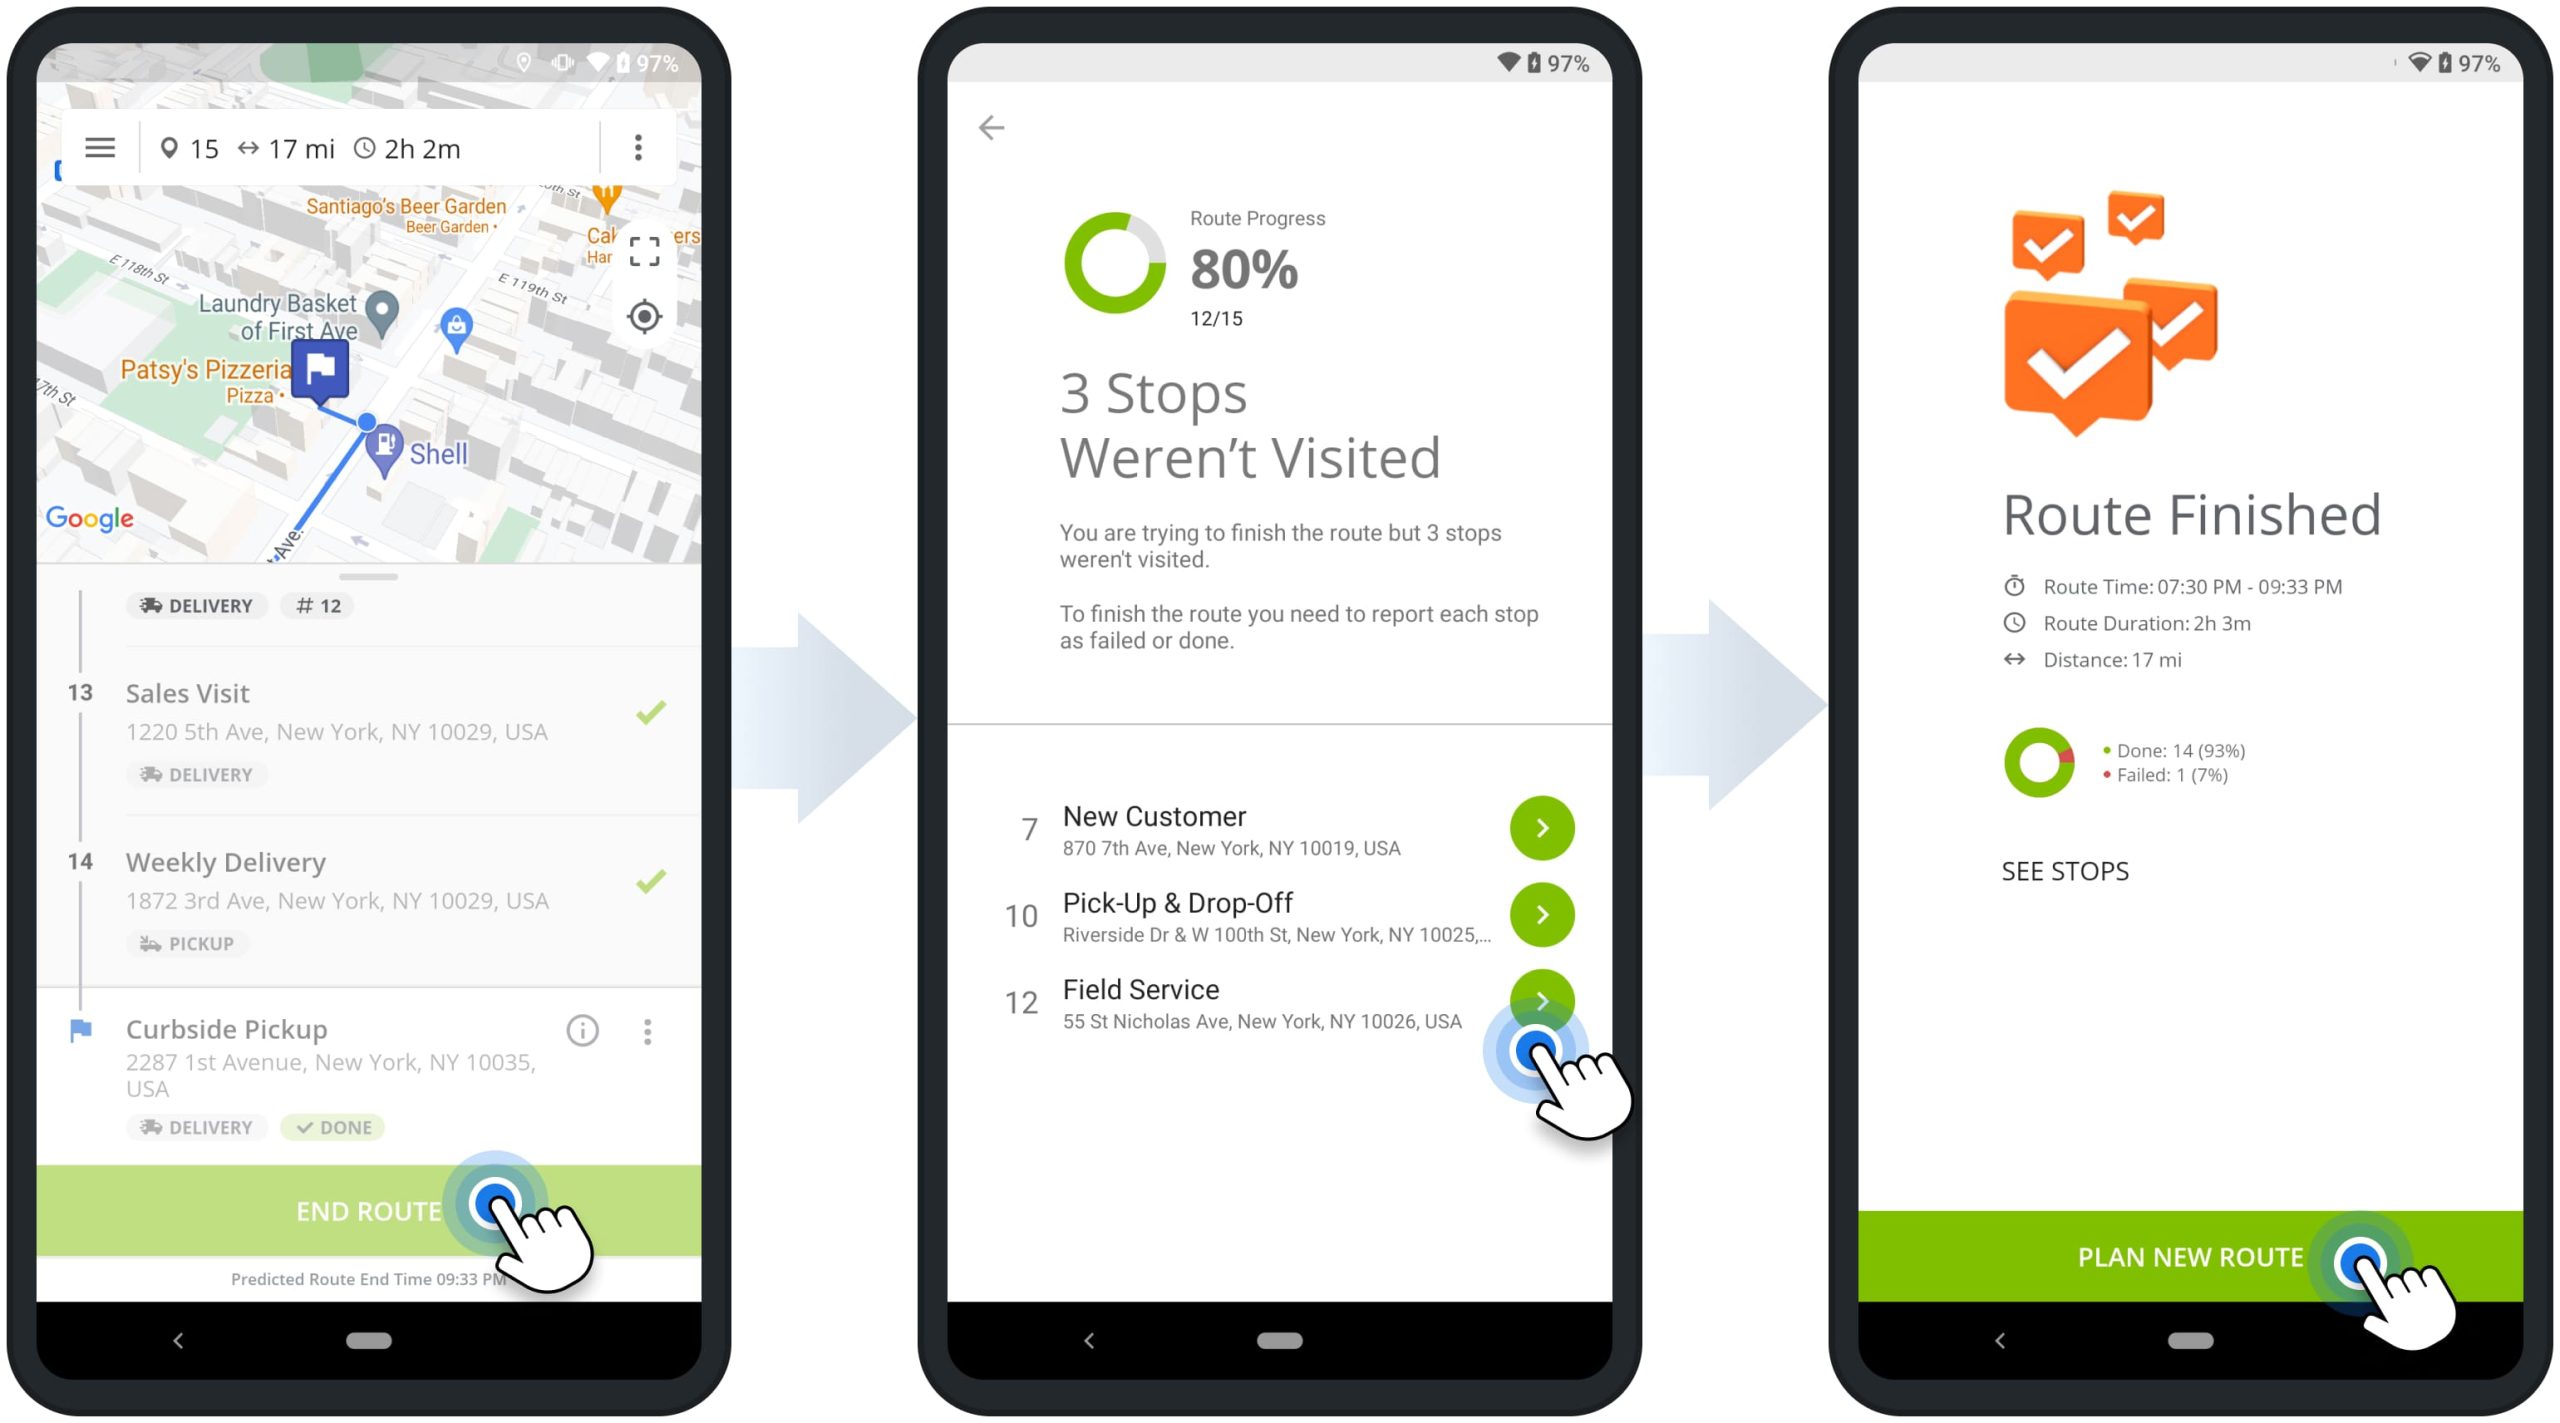 End routes and check route summary KPIs, statistics, and not visited stops on Route4Me's Android Route Planner app for drivers.